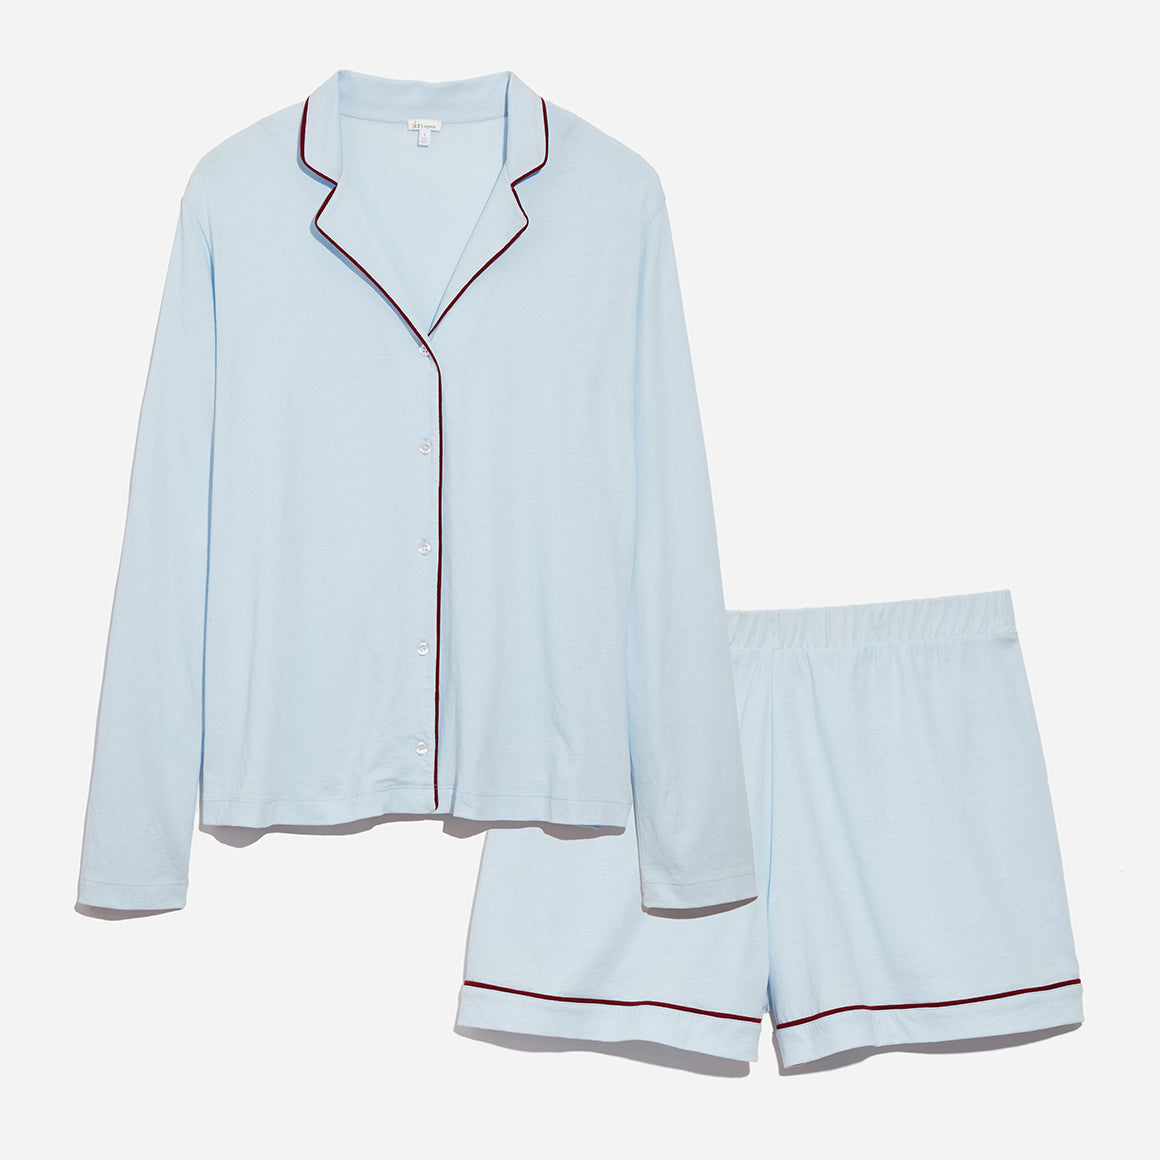 Light blue long sleeve pajama top paired with matching shorts, both with deep red piping with grey background.